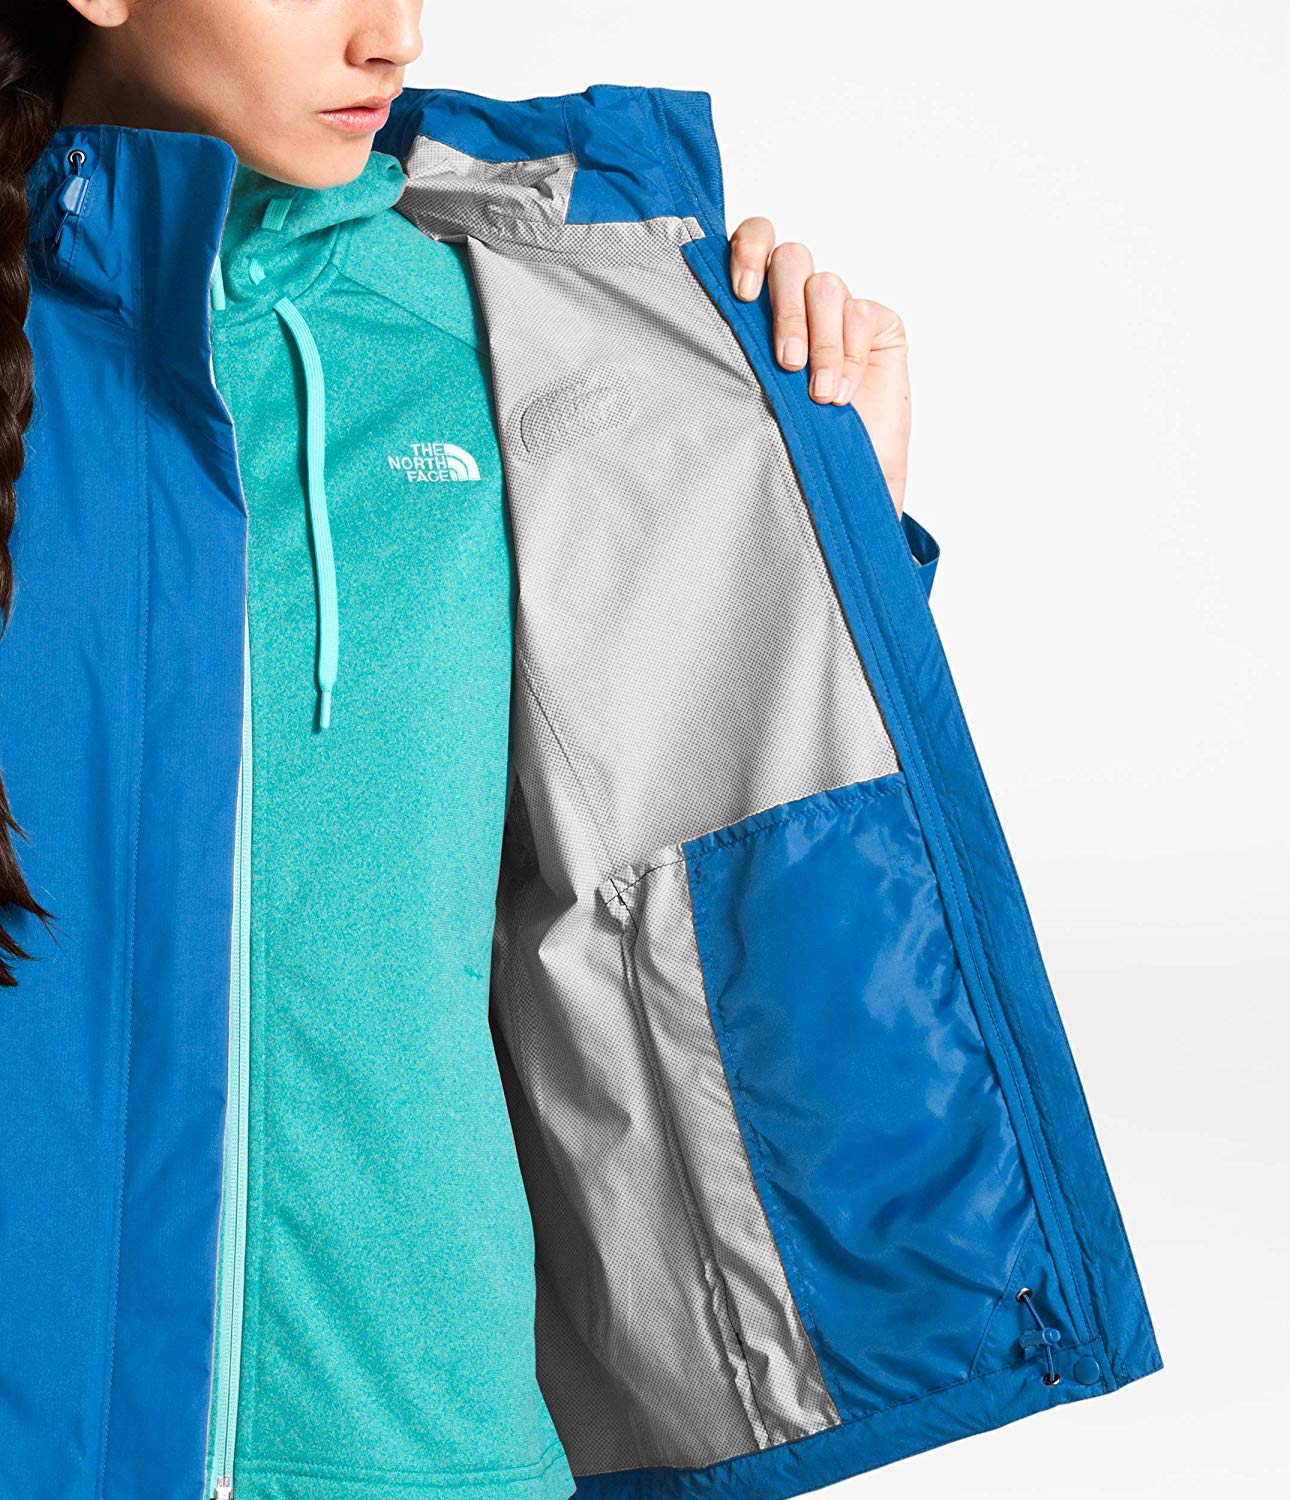 The North Face Women’s Venture 2 Jacket The North Face ktmart.vn 5